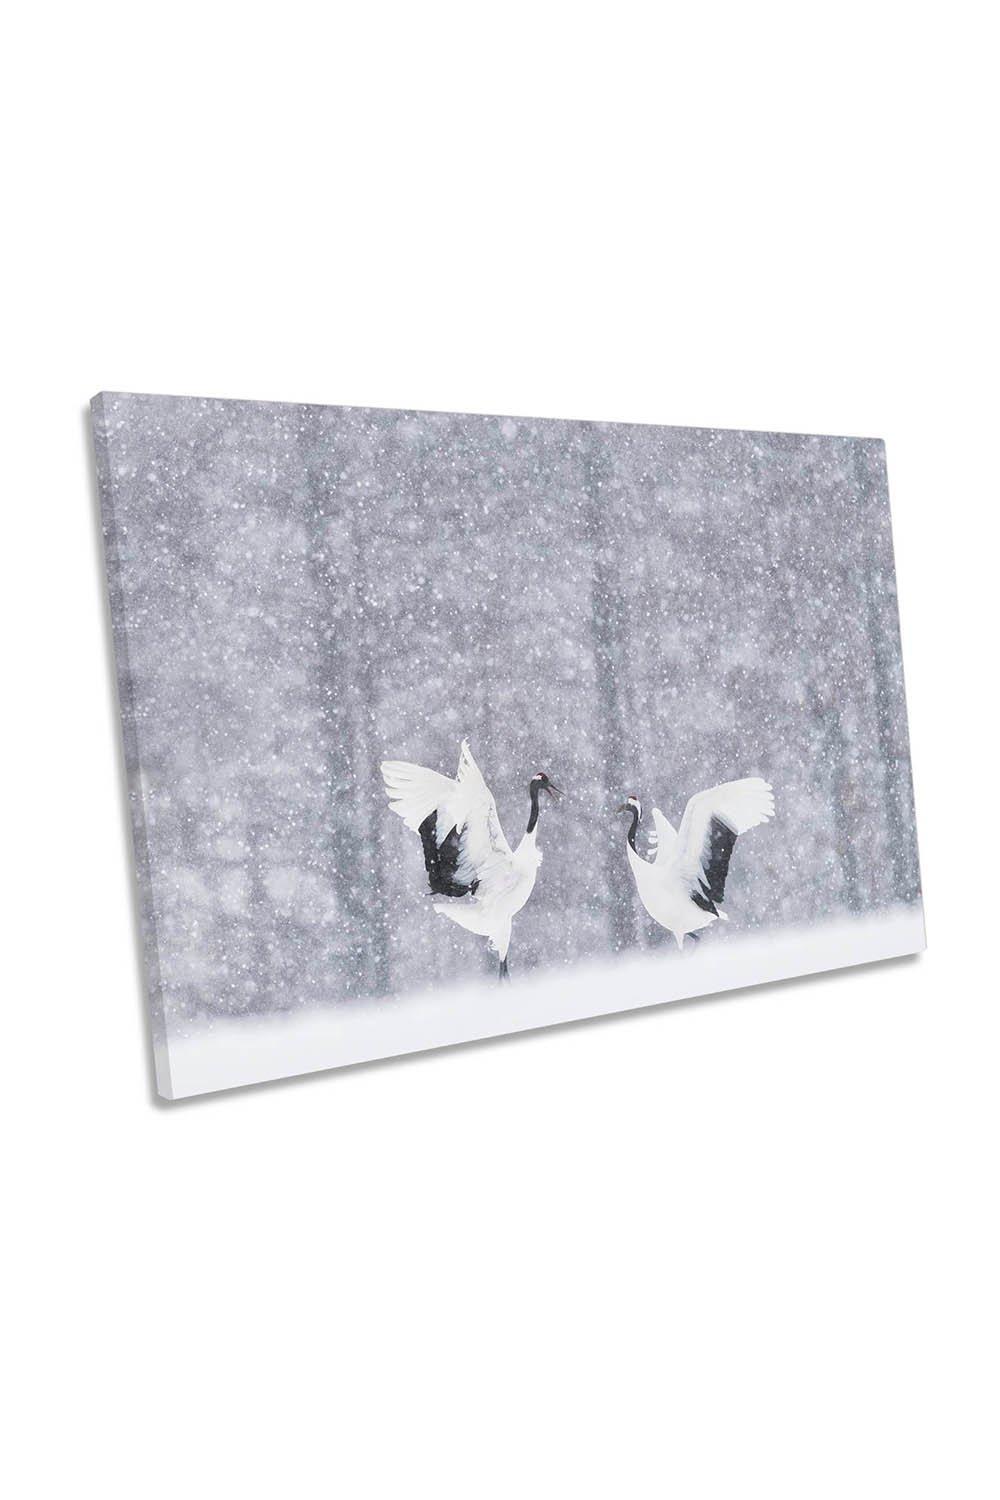 Japan White Cranes Dancing Canvas Wall Art Picture Print